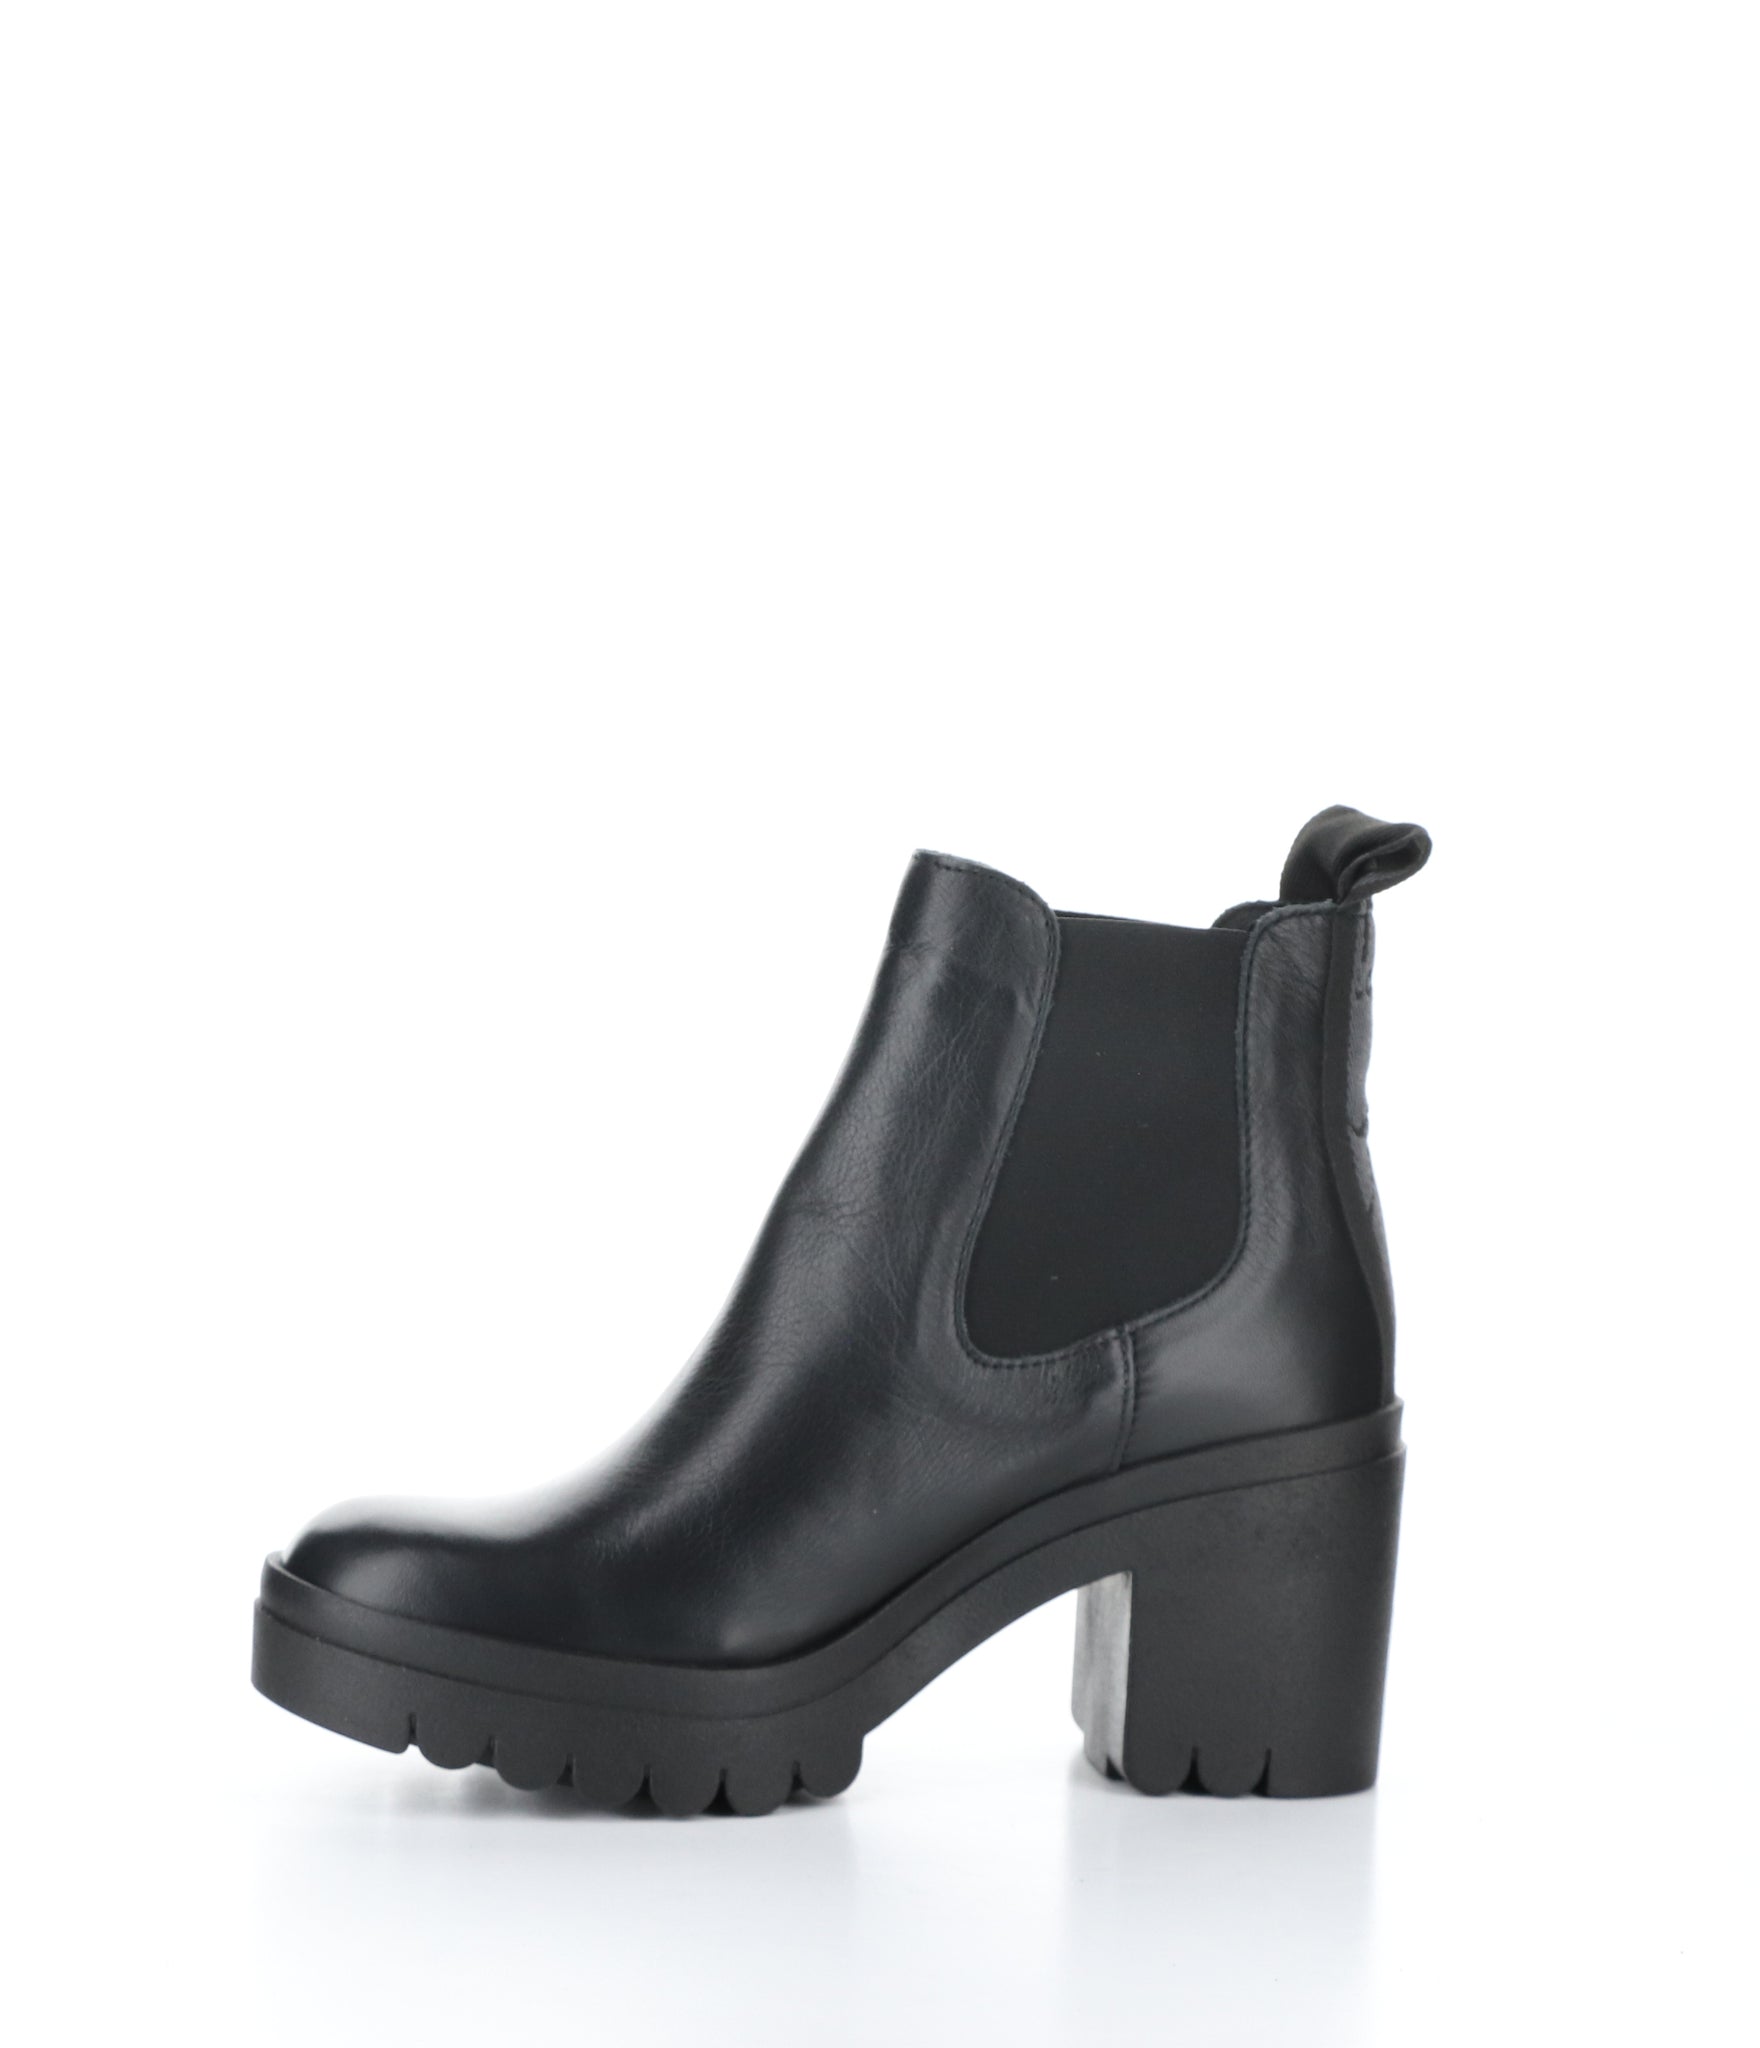 Fly London "Tope" Black medium heel double gore pull on boot